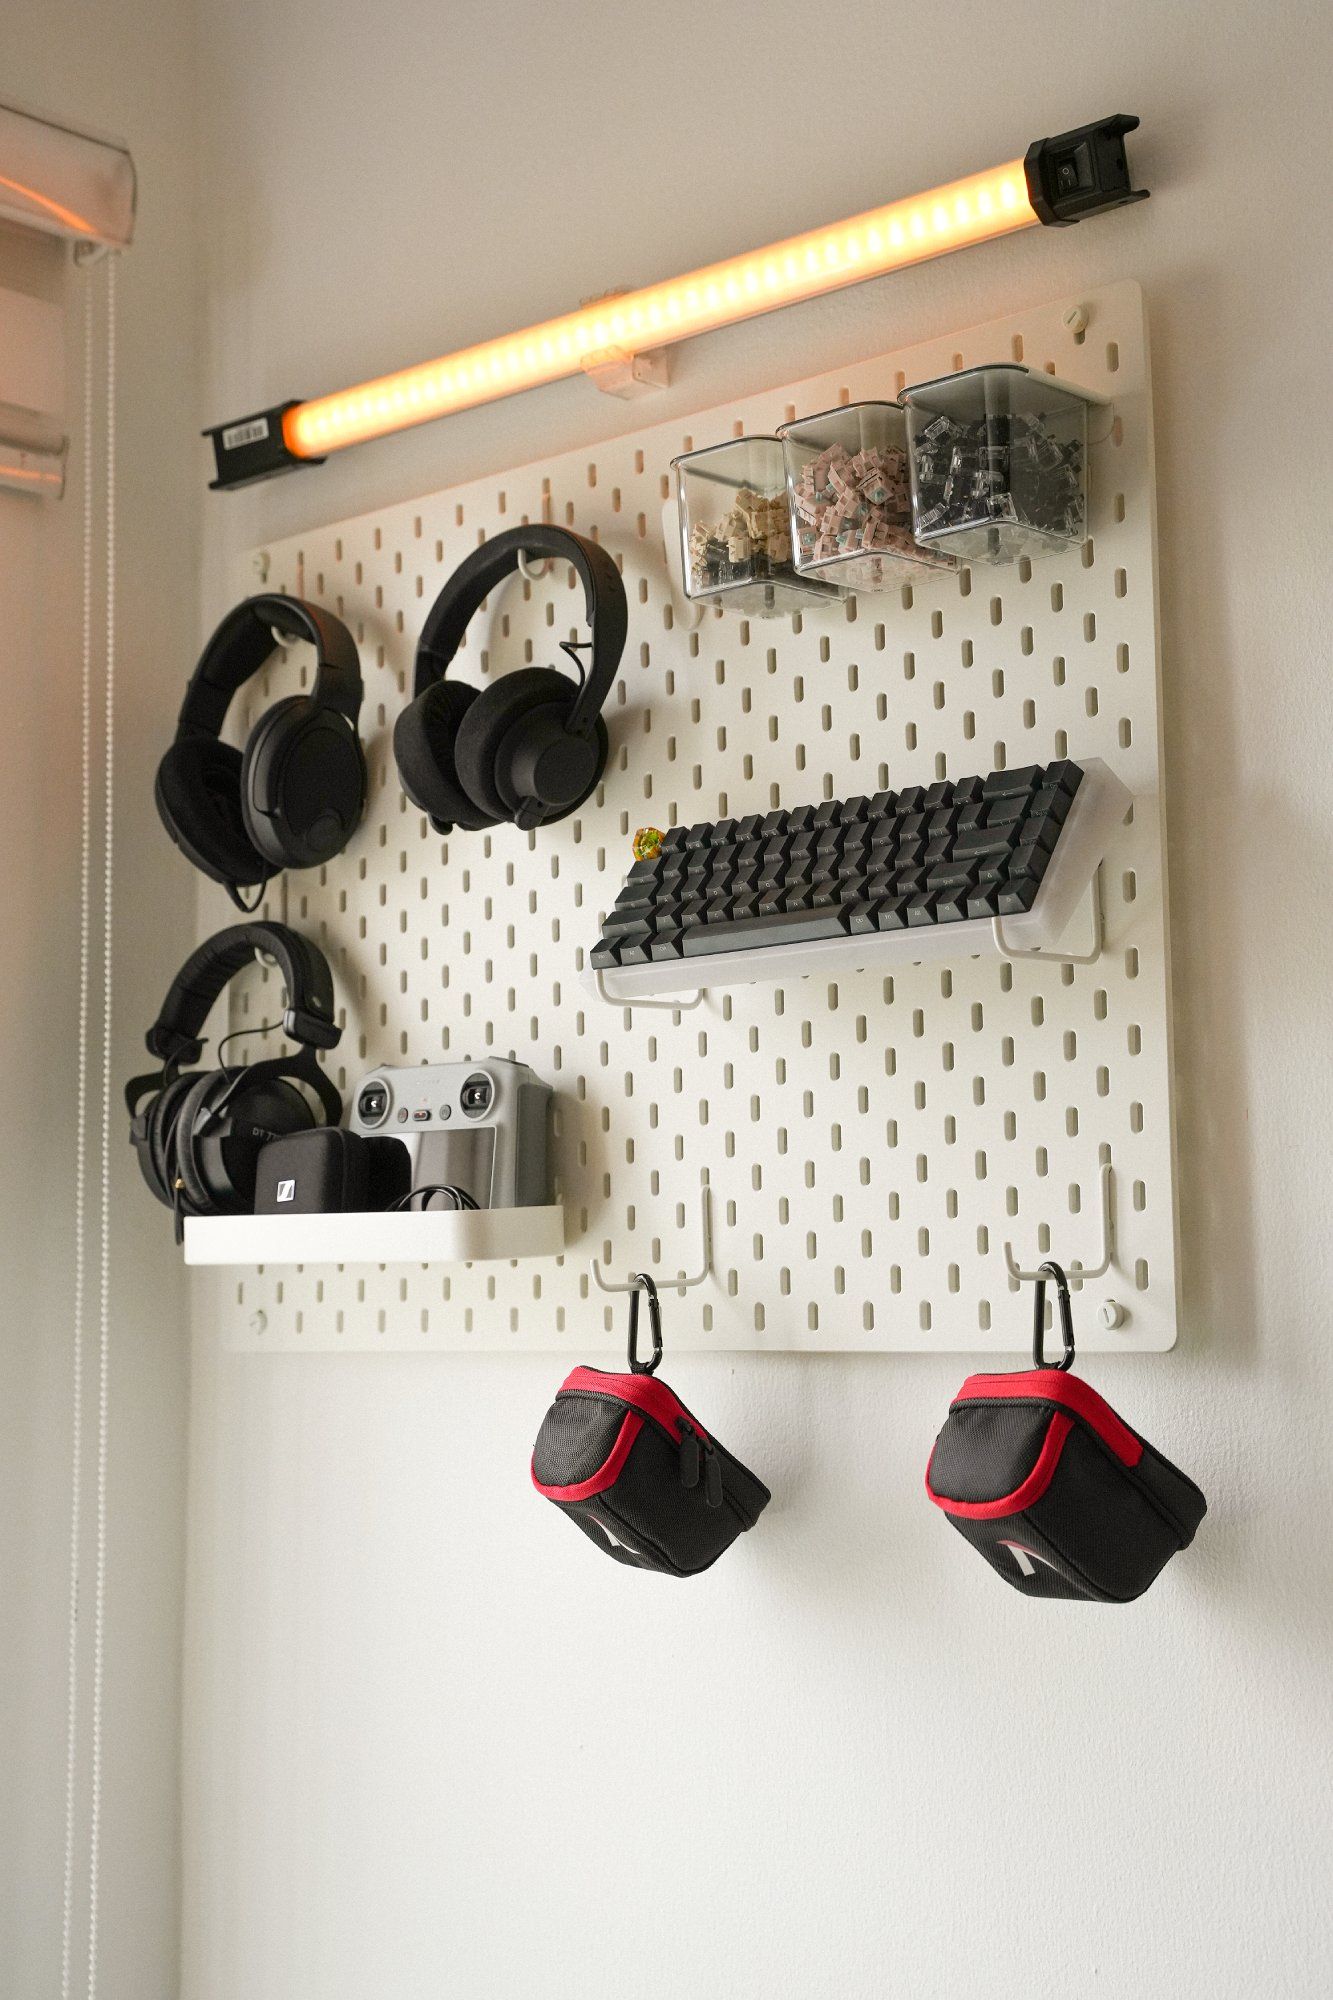 A pegboard displaying home office accessories and peripherals such as headphones, keyboard keycaps, and other items